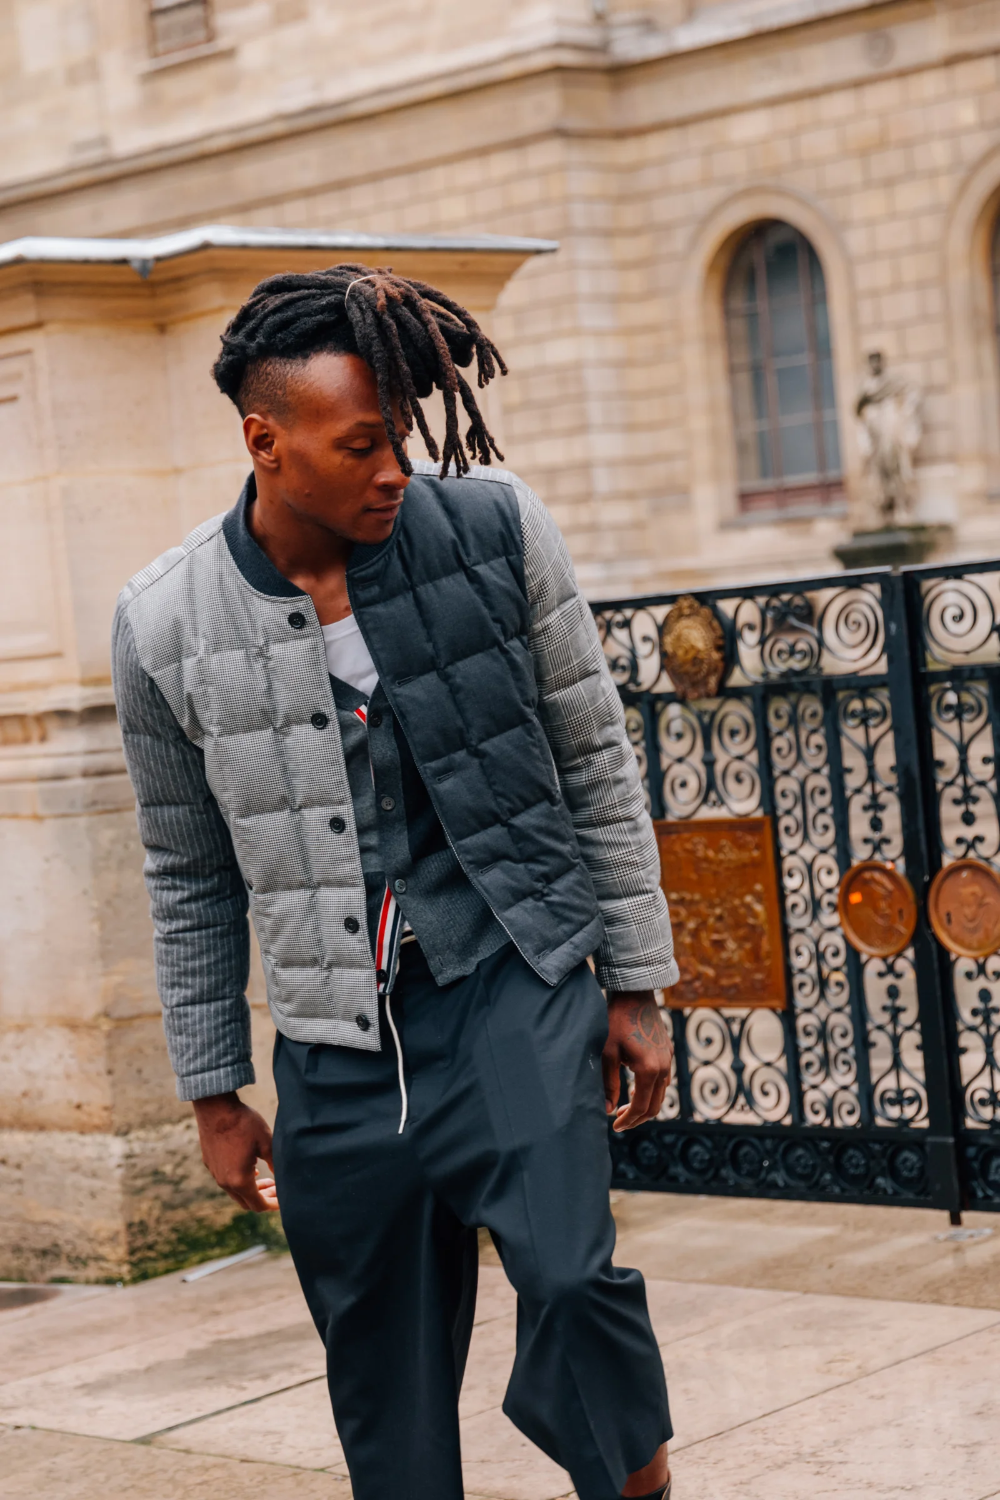 The Best Street Style from Paris Fashion Week - The Best Street Style from Paris Fashion Week -   17 style Urban hipster ideas